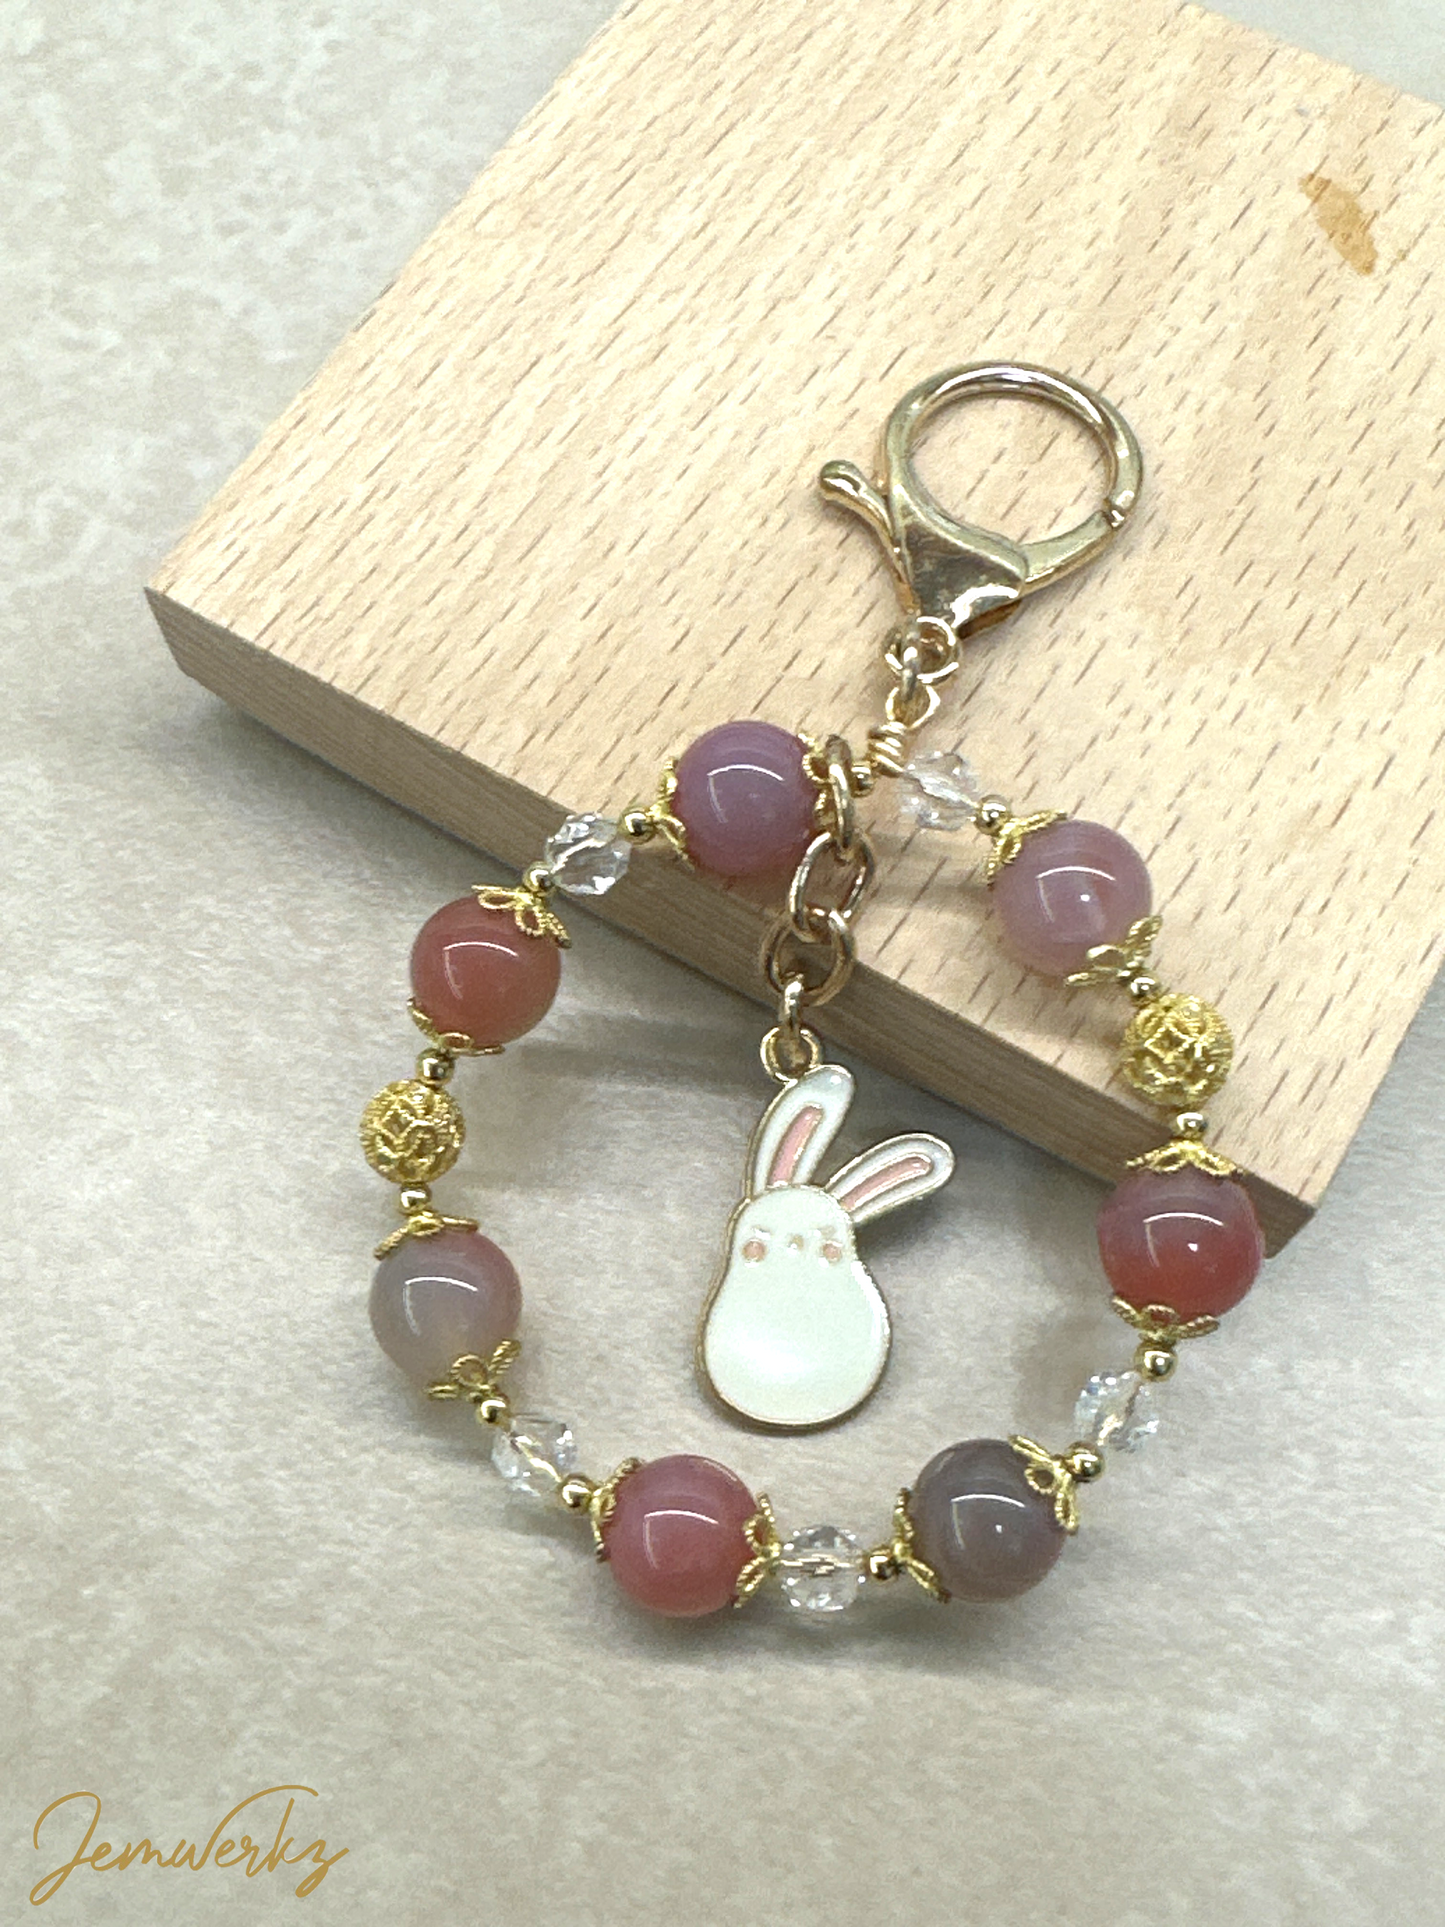 YESENIA - Yan Yuan Agate with Faceted Clear Quartz and Bunny Bag Charm